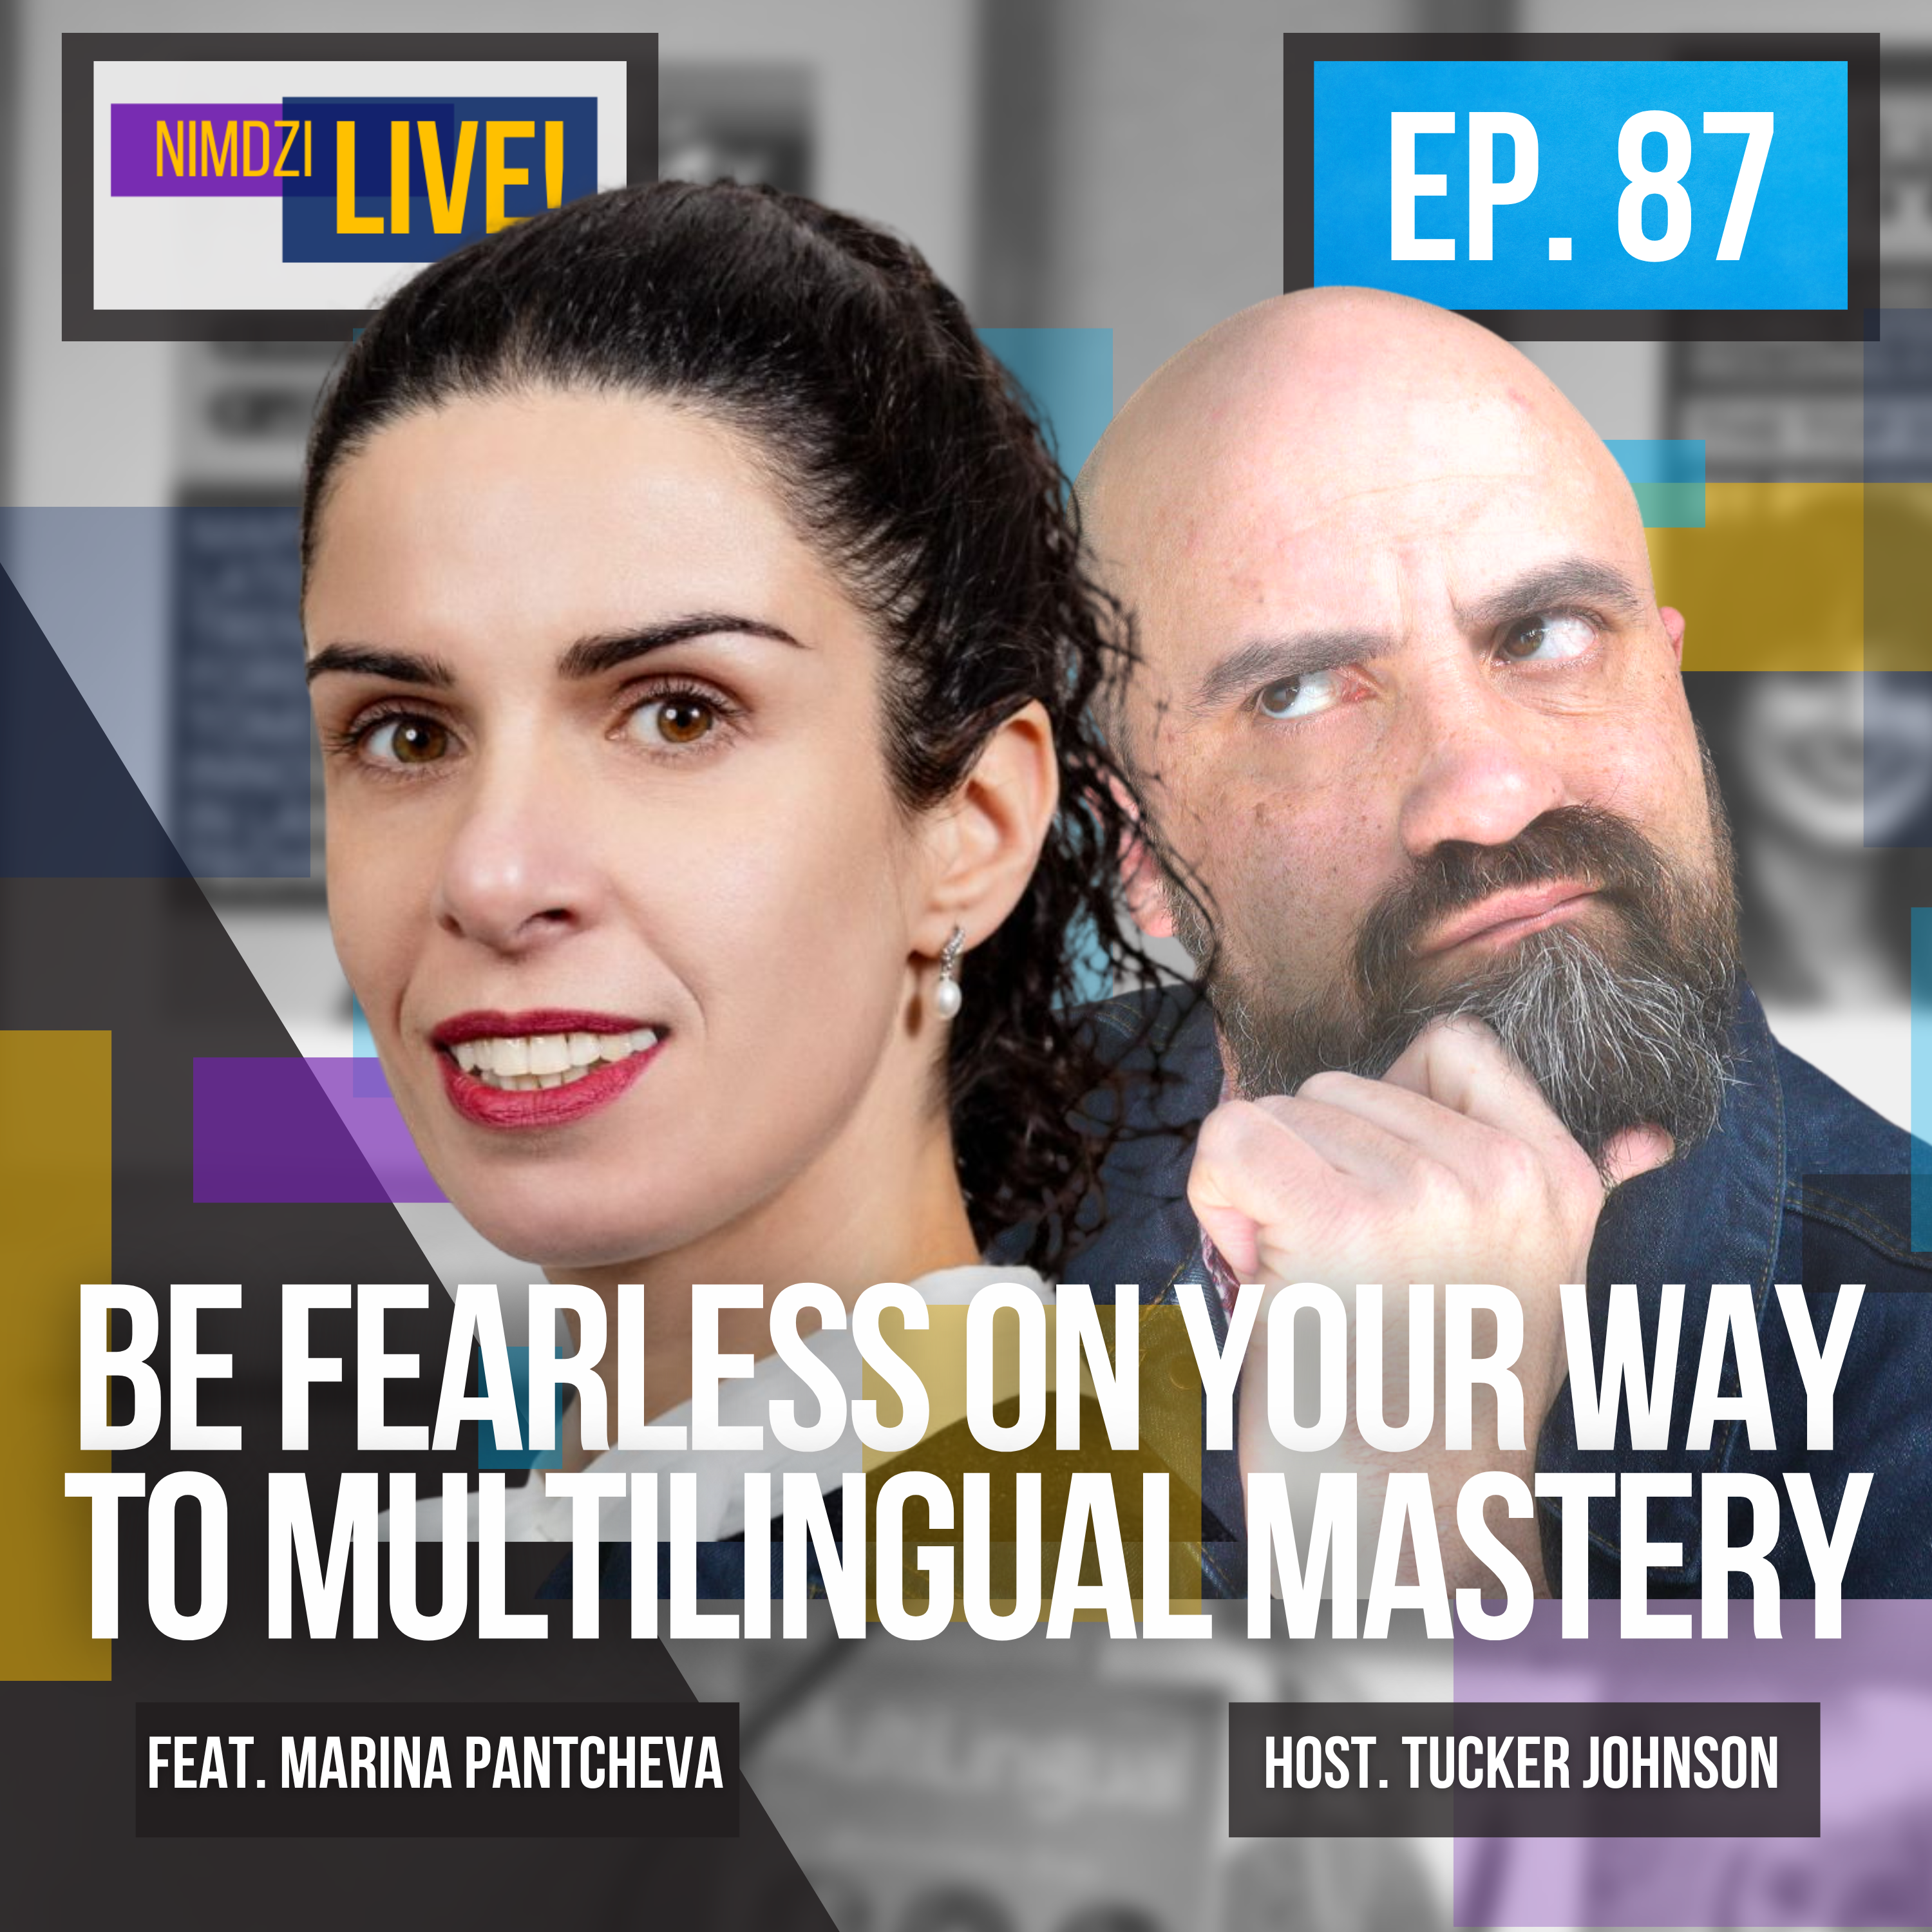 Be fearless on your way to multilingual mastery feat. Marina Pantcheva